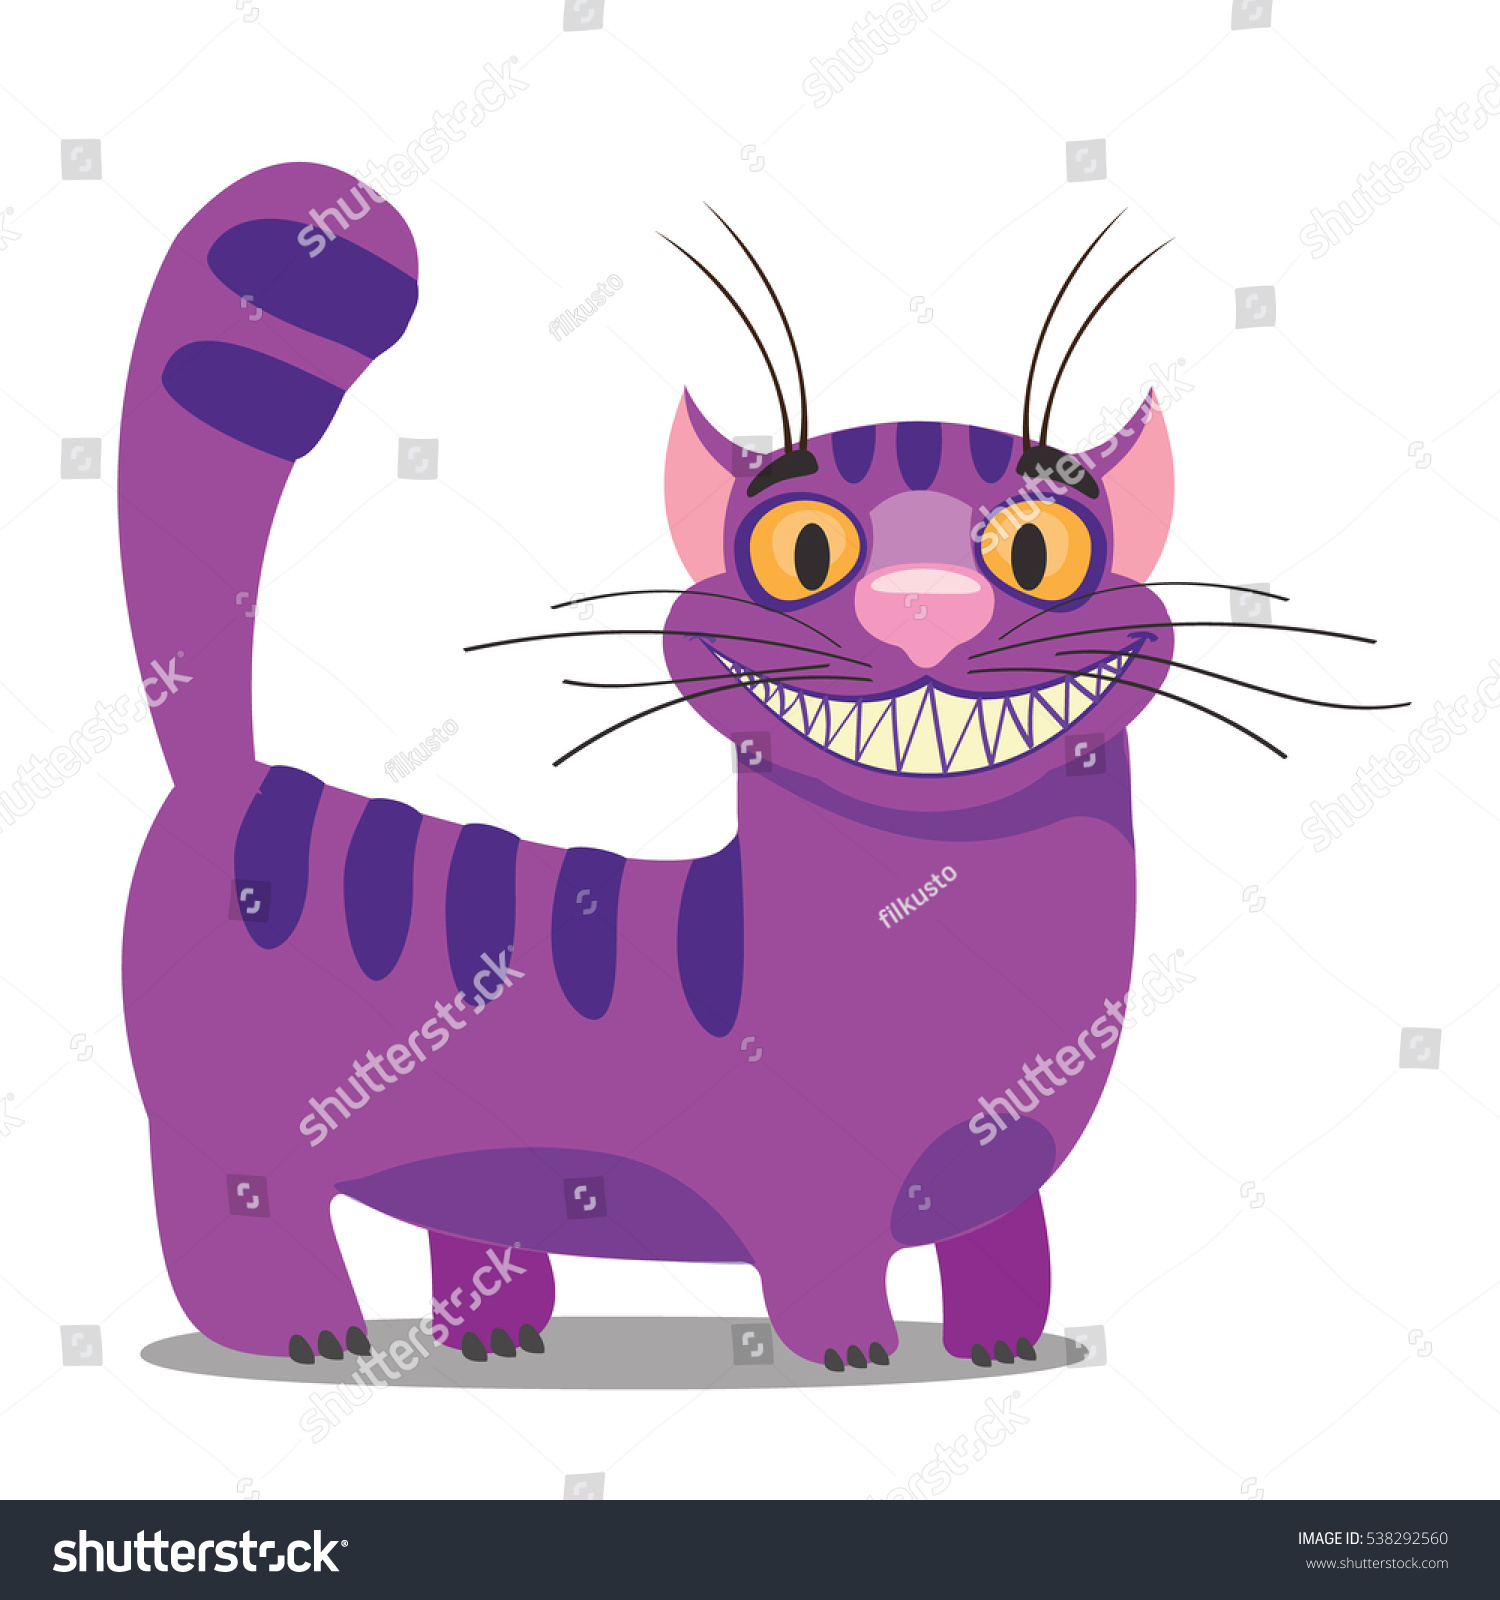 SVG of Cheshire Cat. Illustration to the fairy tale Alice's Adventures in Wonderland. Purple cat with a big smile standing. svg